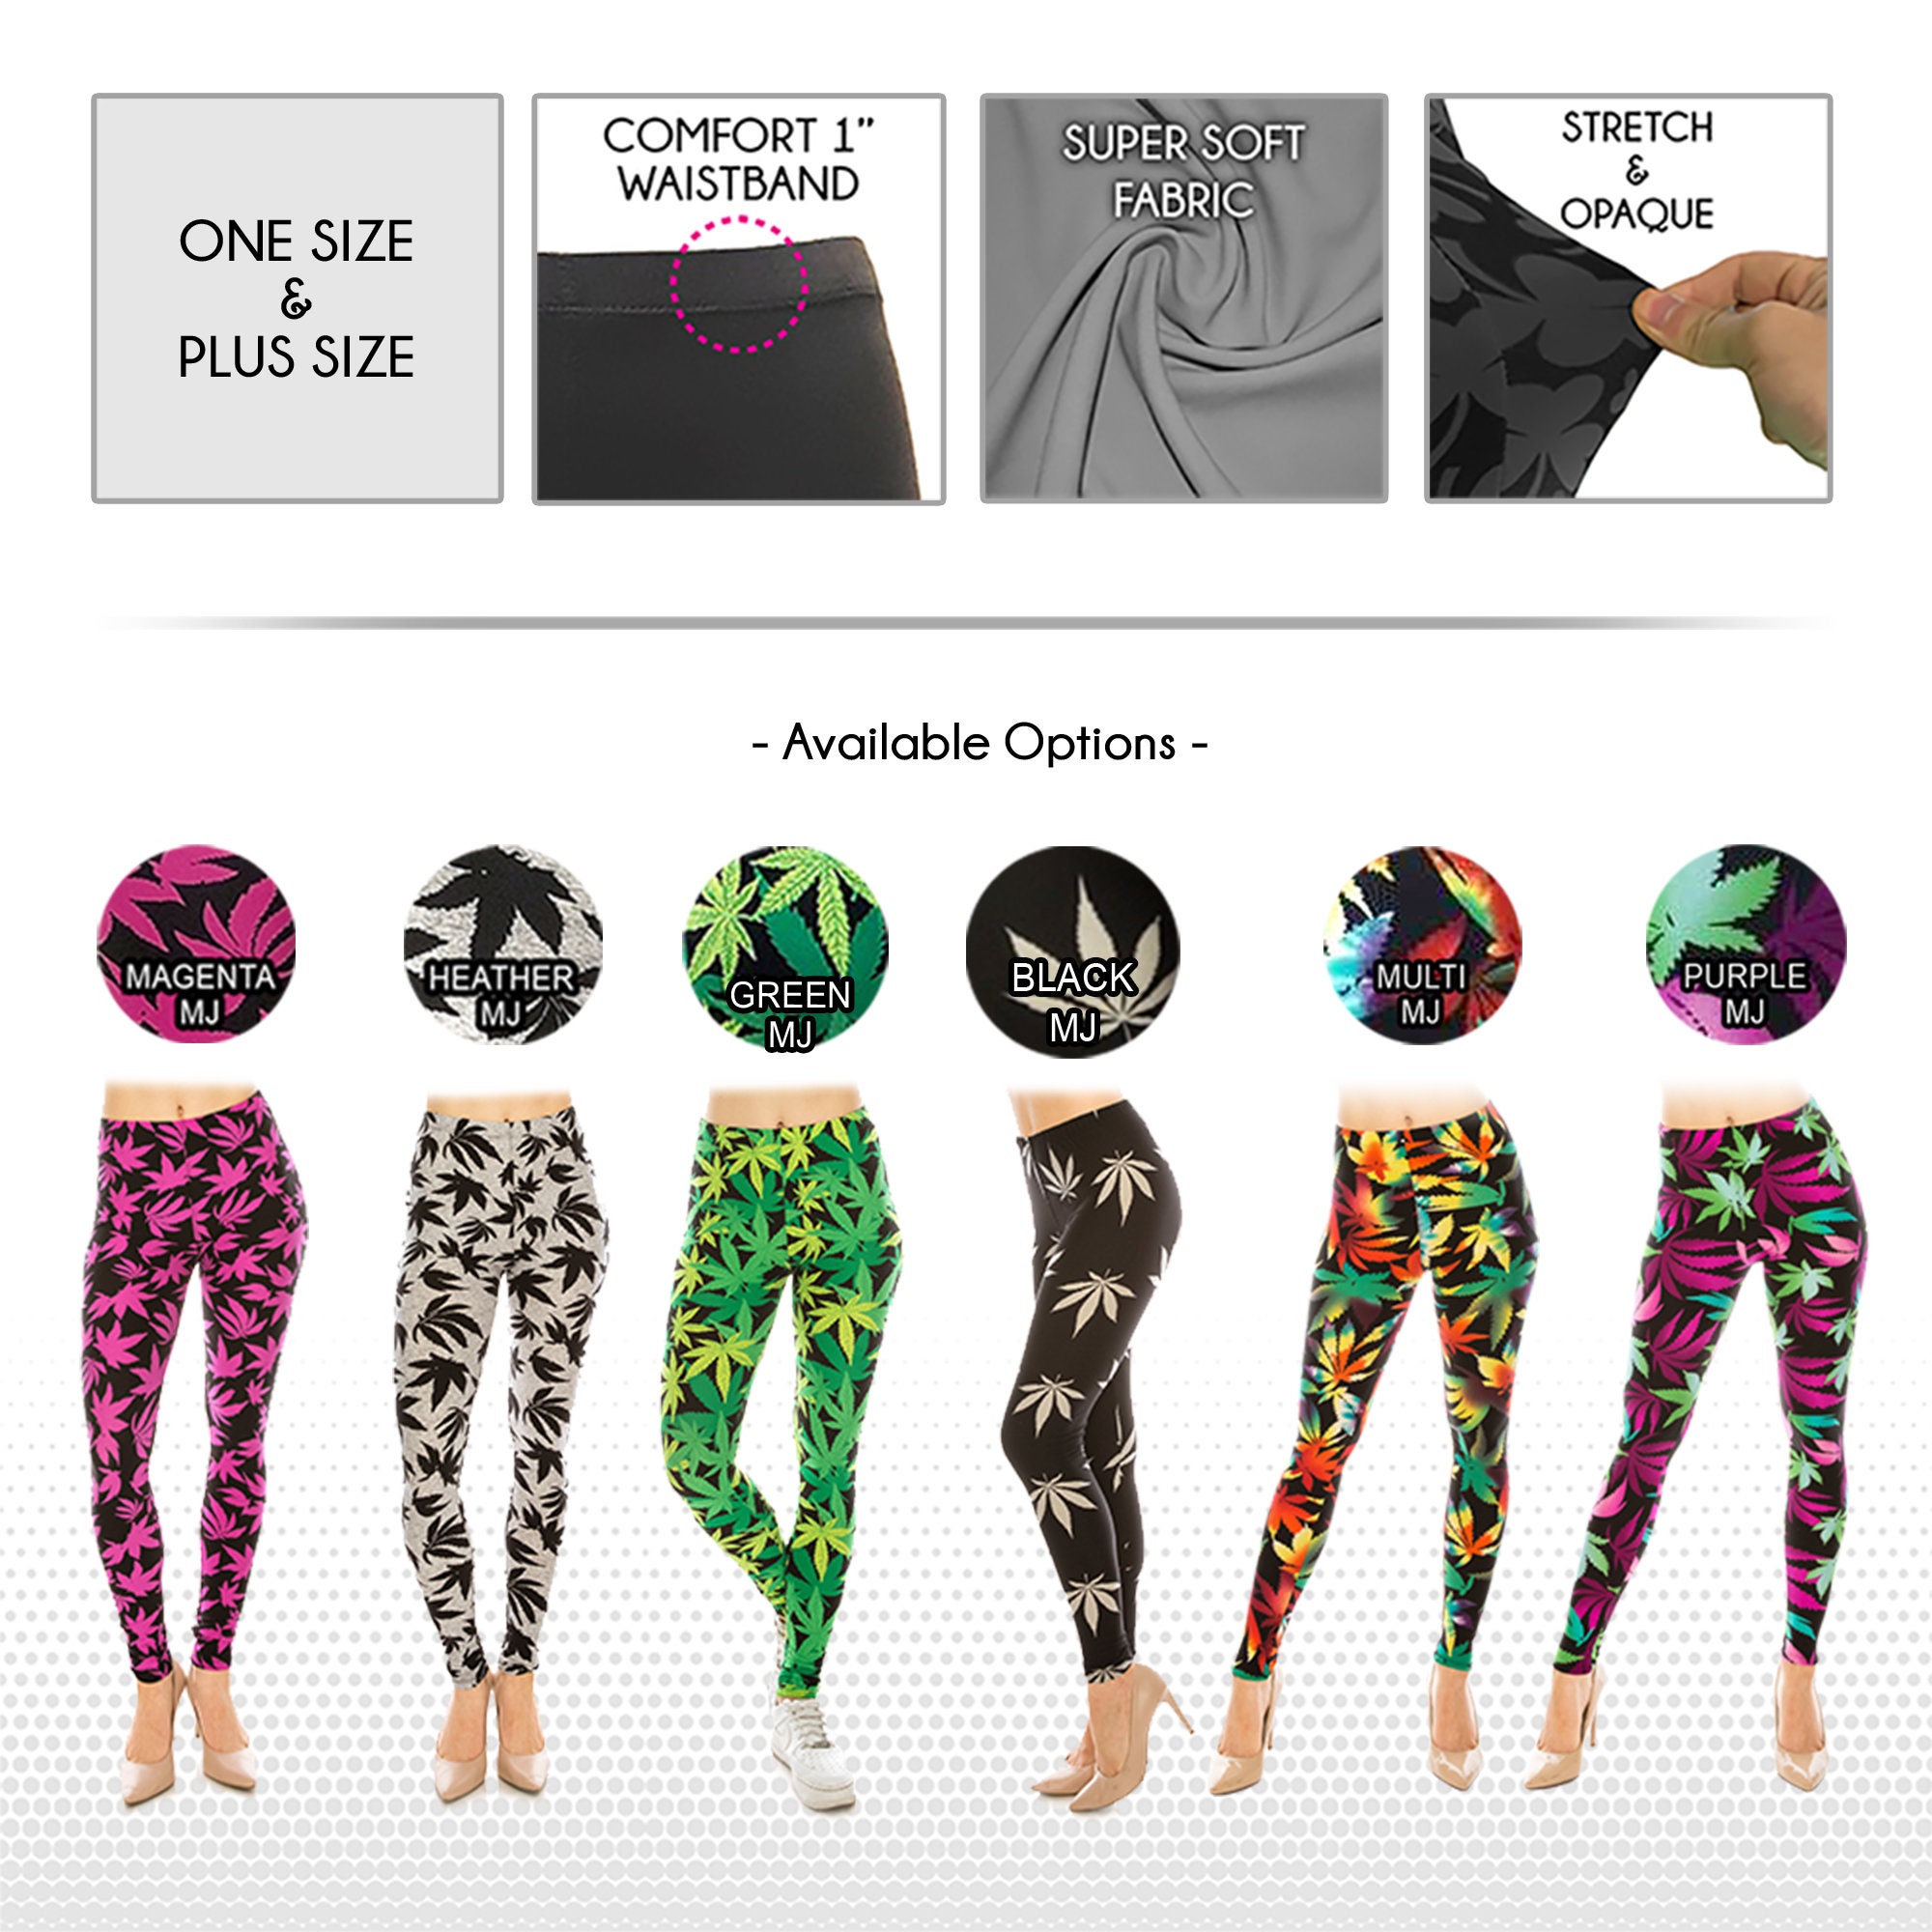 Floral & Plant Patterned Leggings for Women free Shipping 